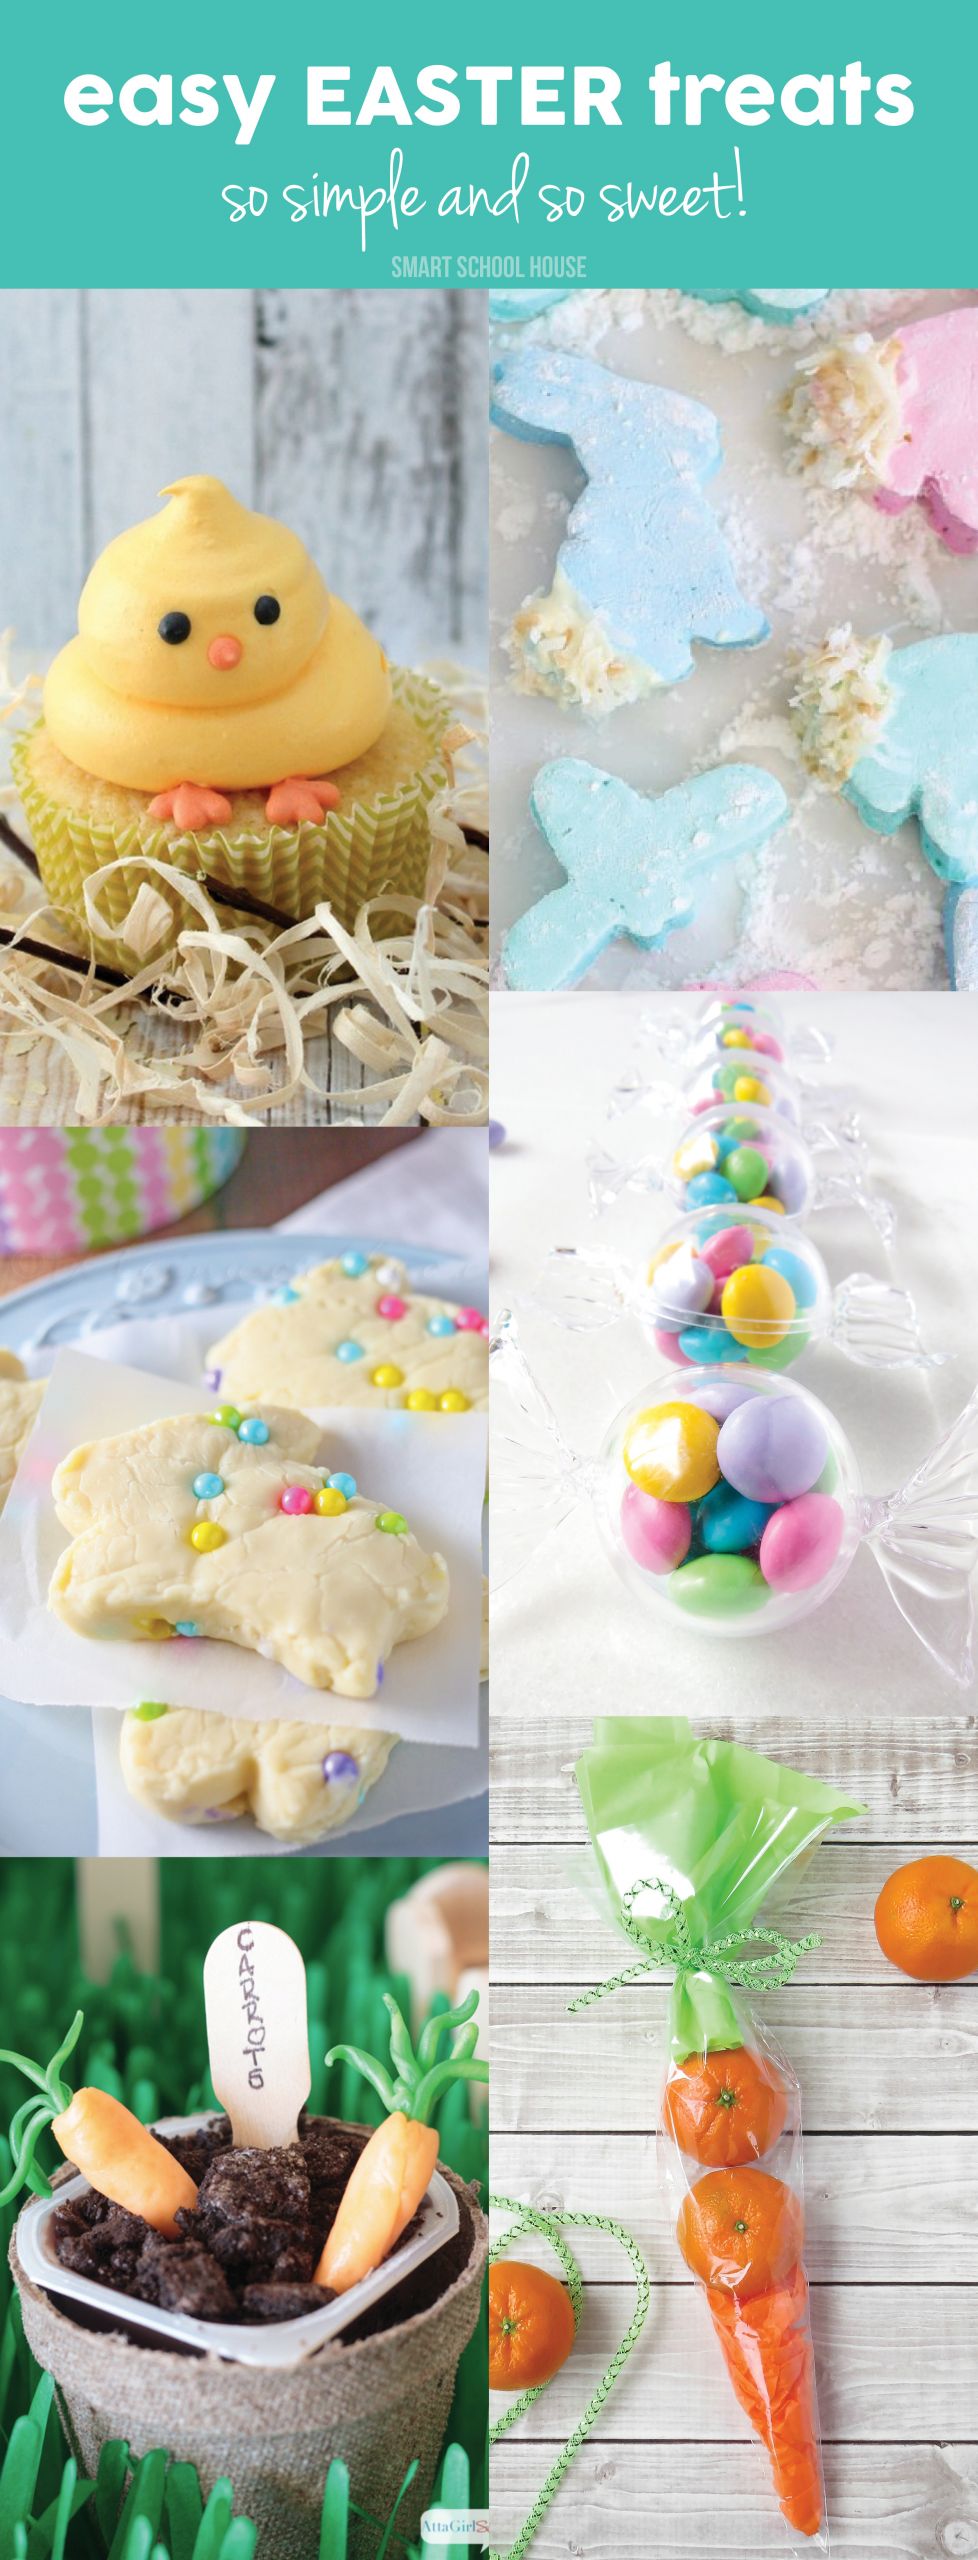 Easter School Party Ideas
 easy easter treats